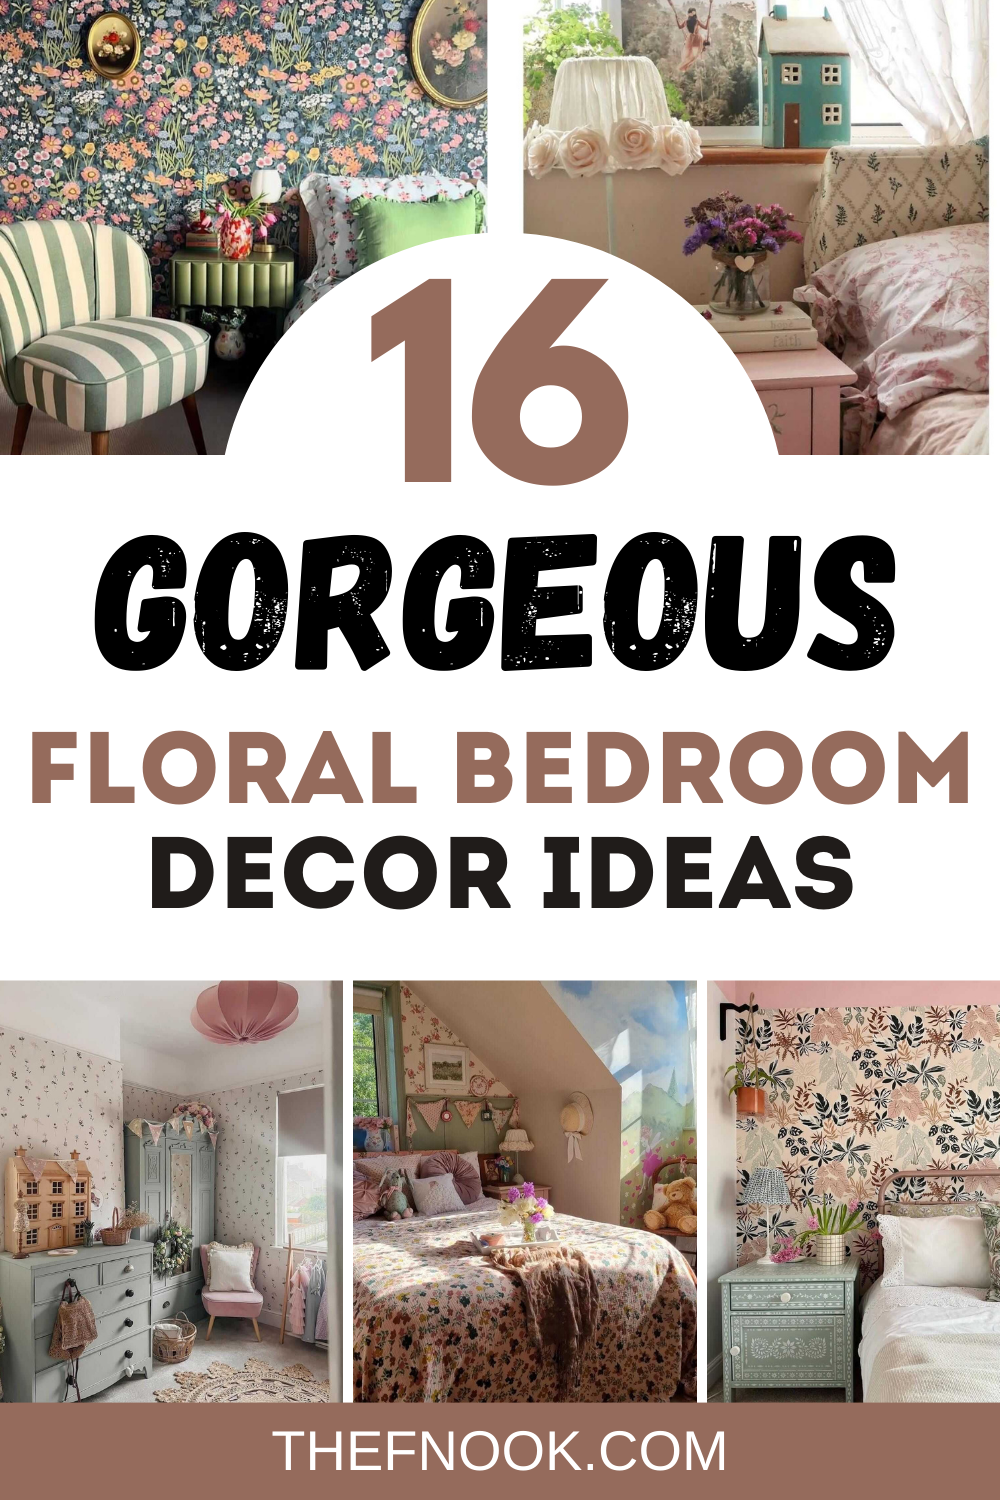 16 Gorgeous Floral Bedroom Decor Ideas for your Teen Girl